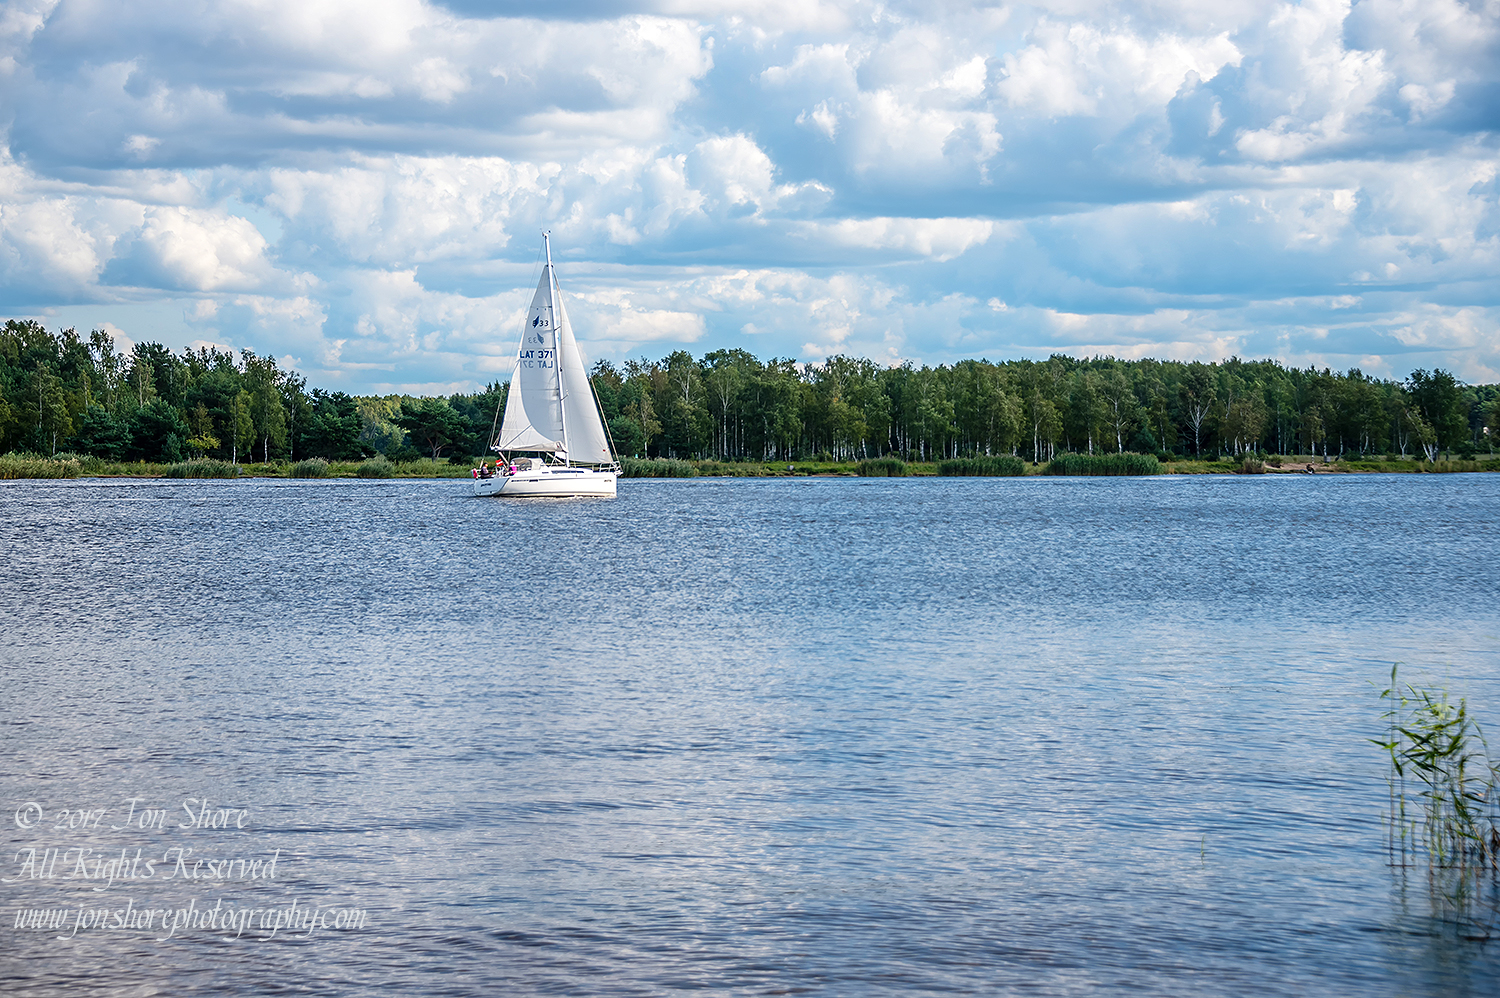 Sailboat on the Lielupe River Latvia August 2017 by Jon Shore